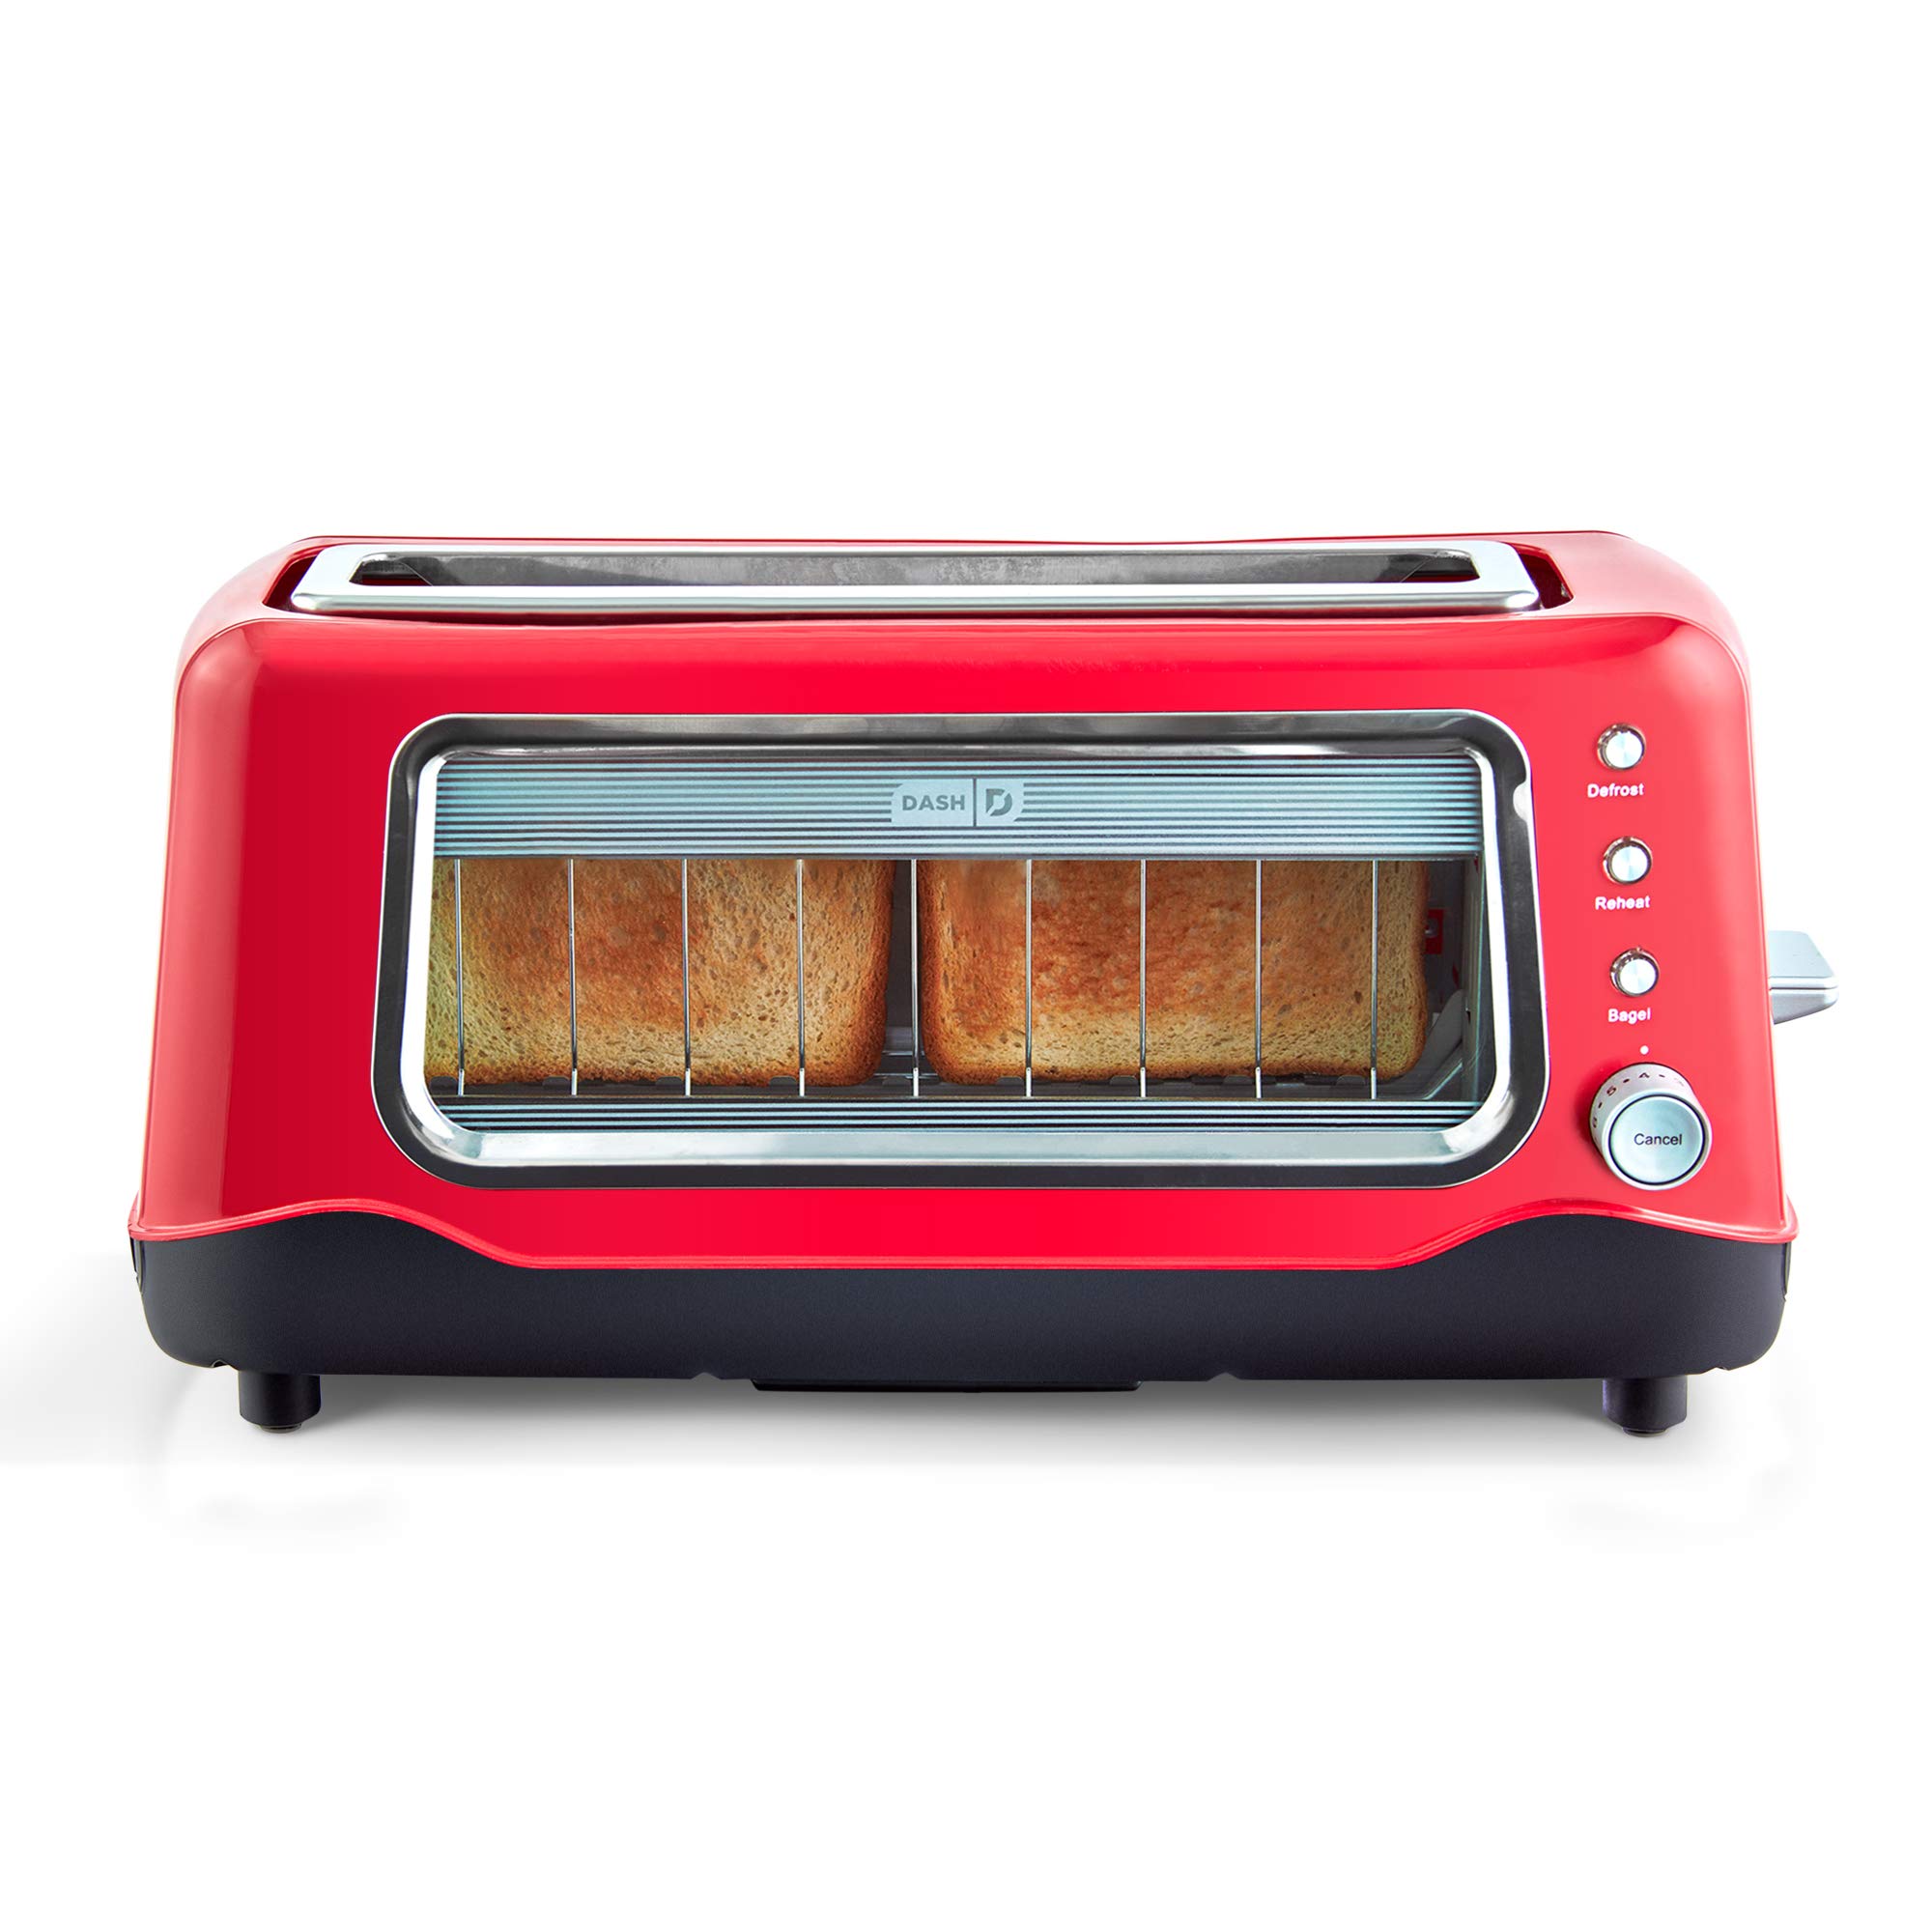 Dash Clear View Toaster: Transparent Window for Monitoring Toasting Progress